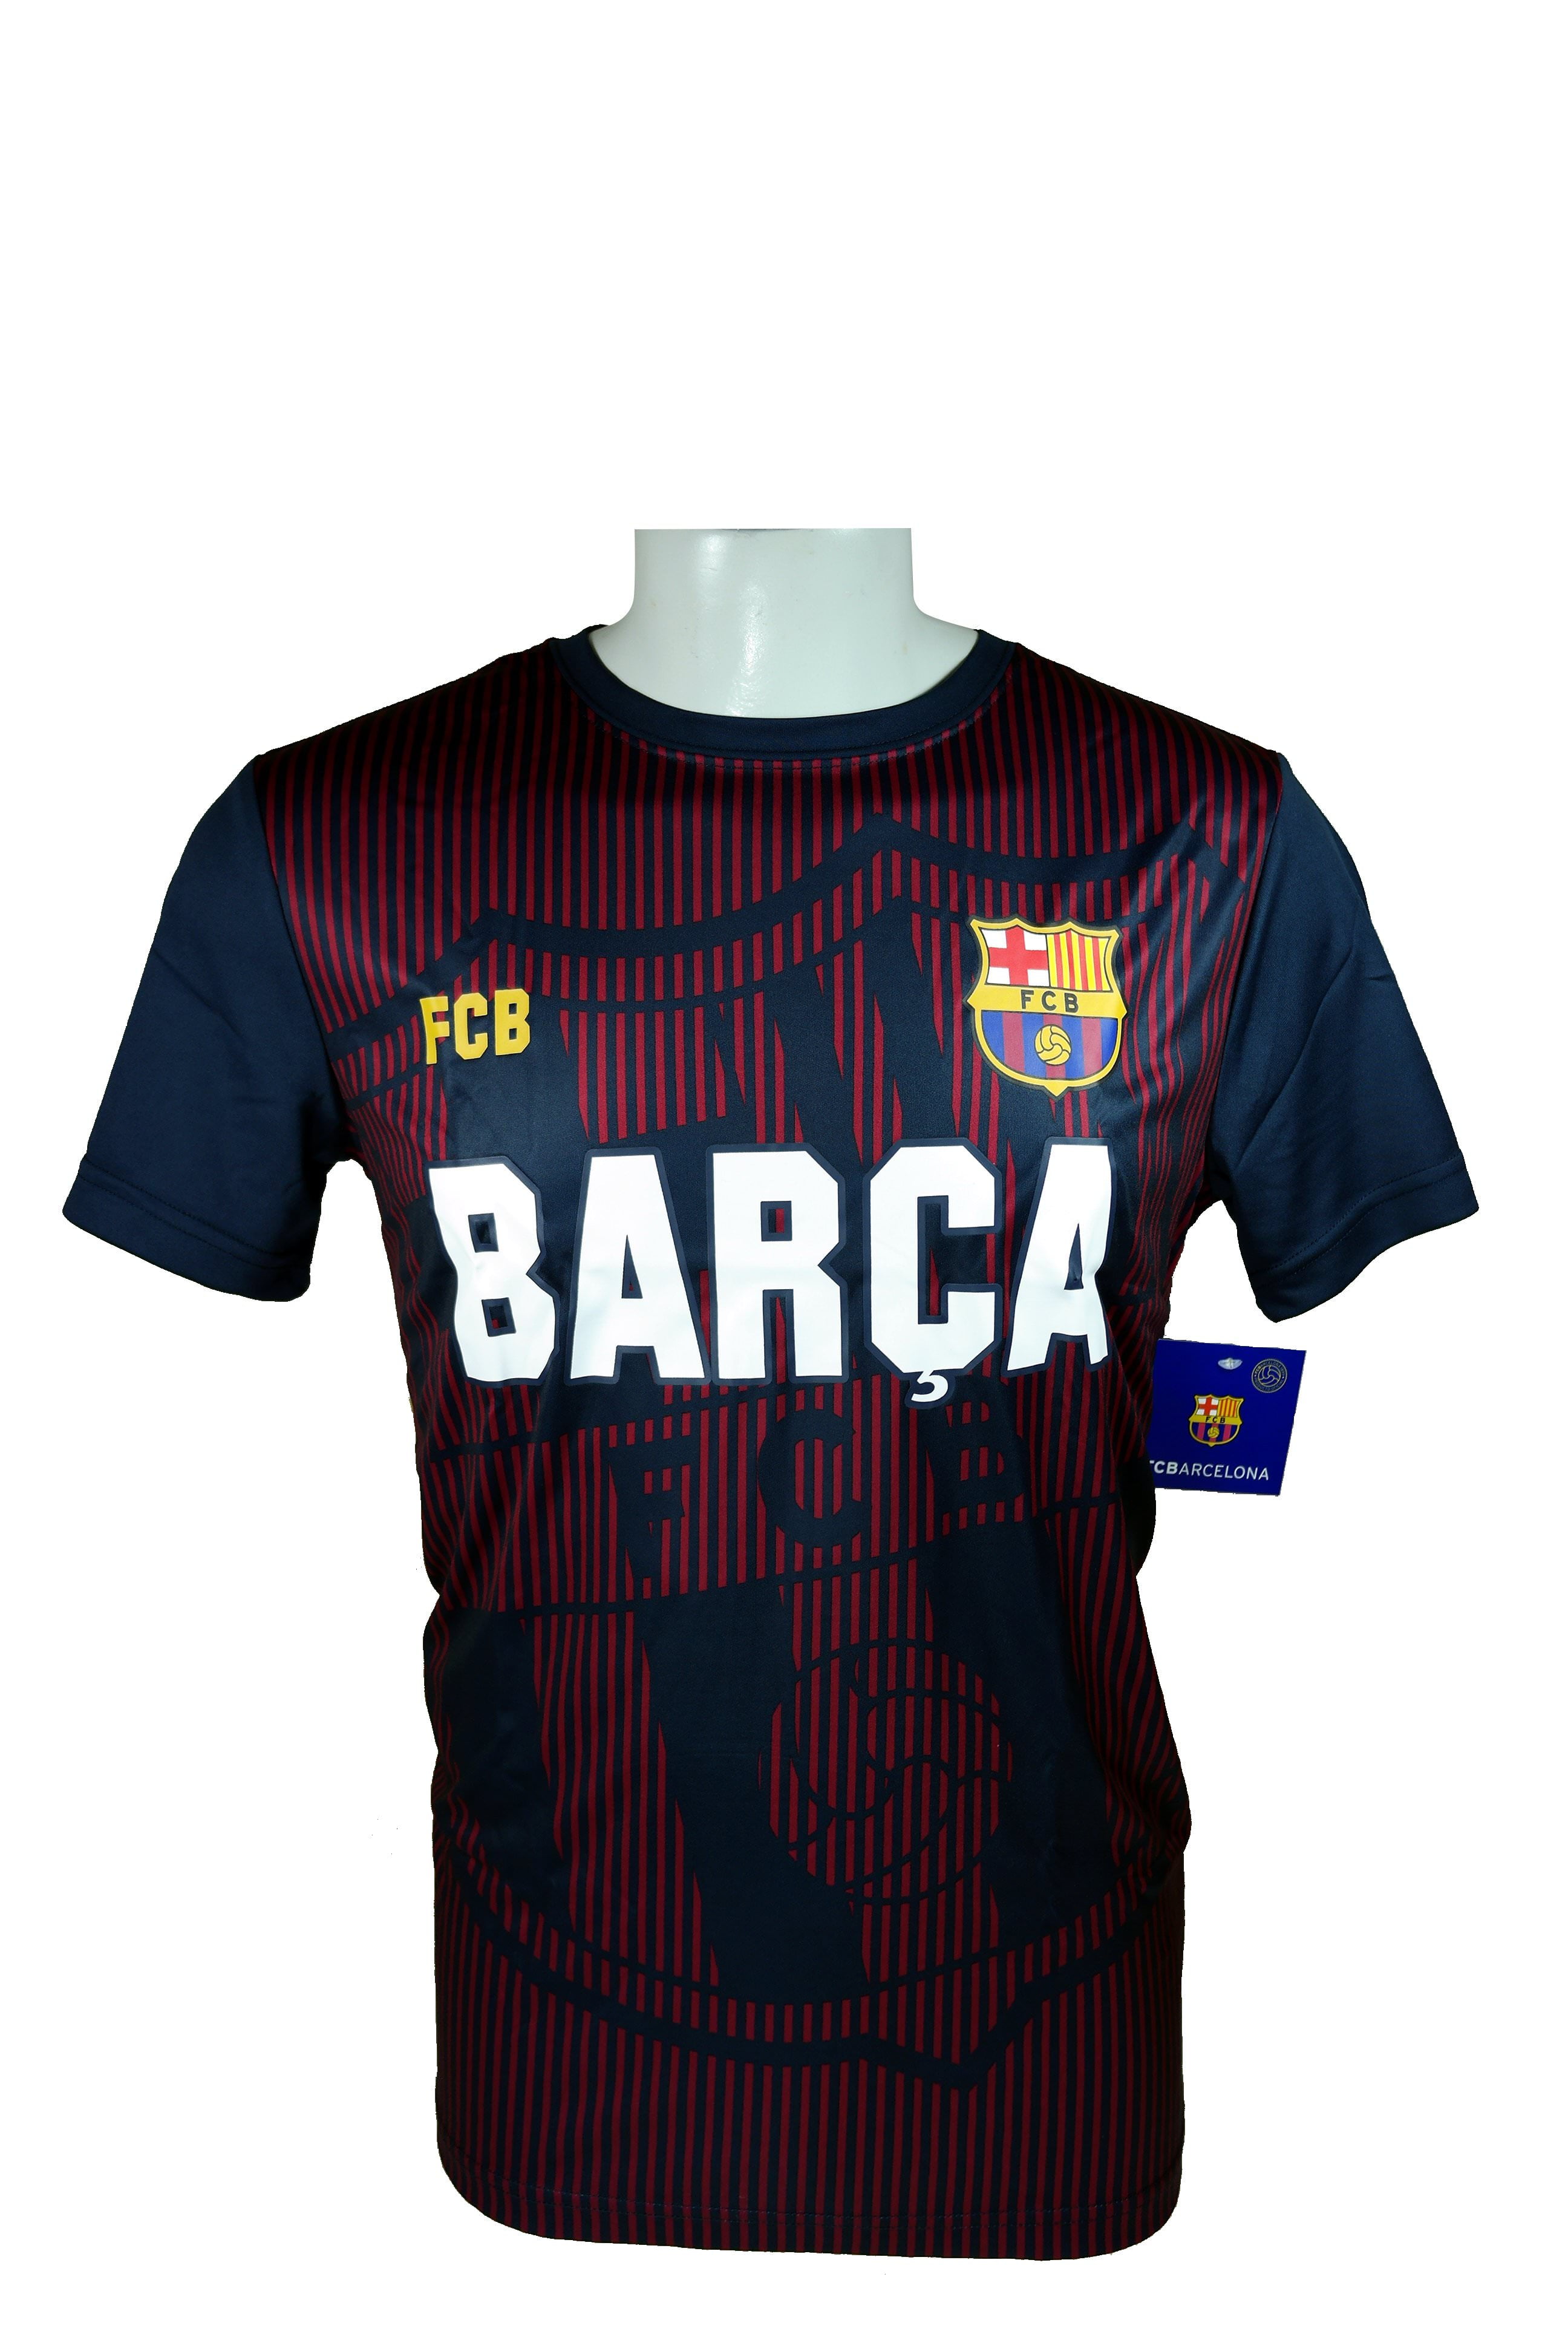 XL Dri-Fit shirt Official Product FCB Brand New With Tags FC Barcelona L 